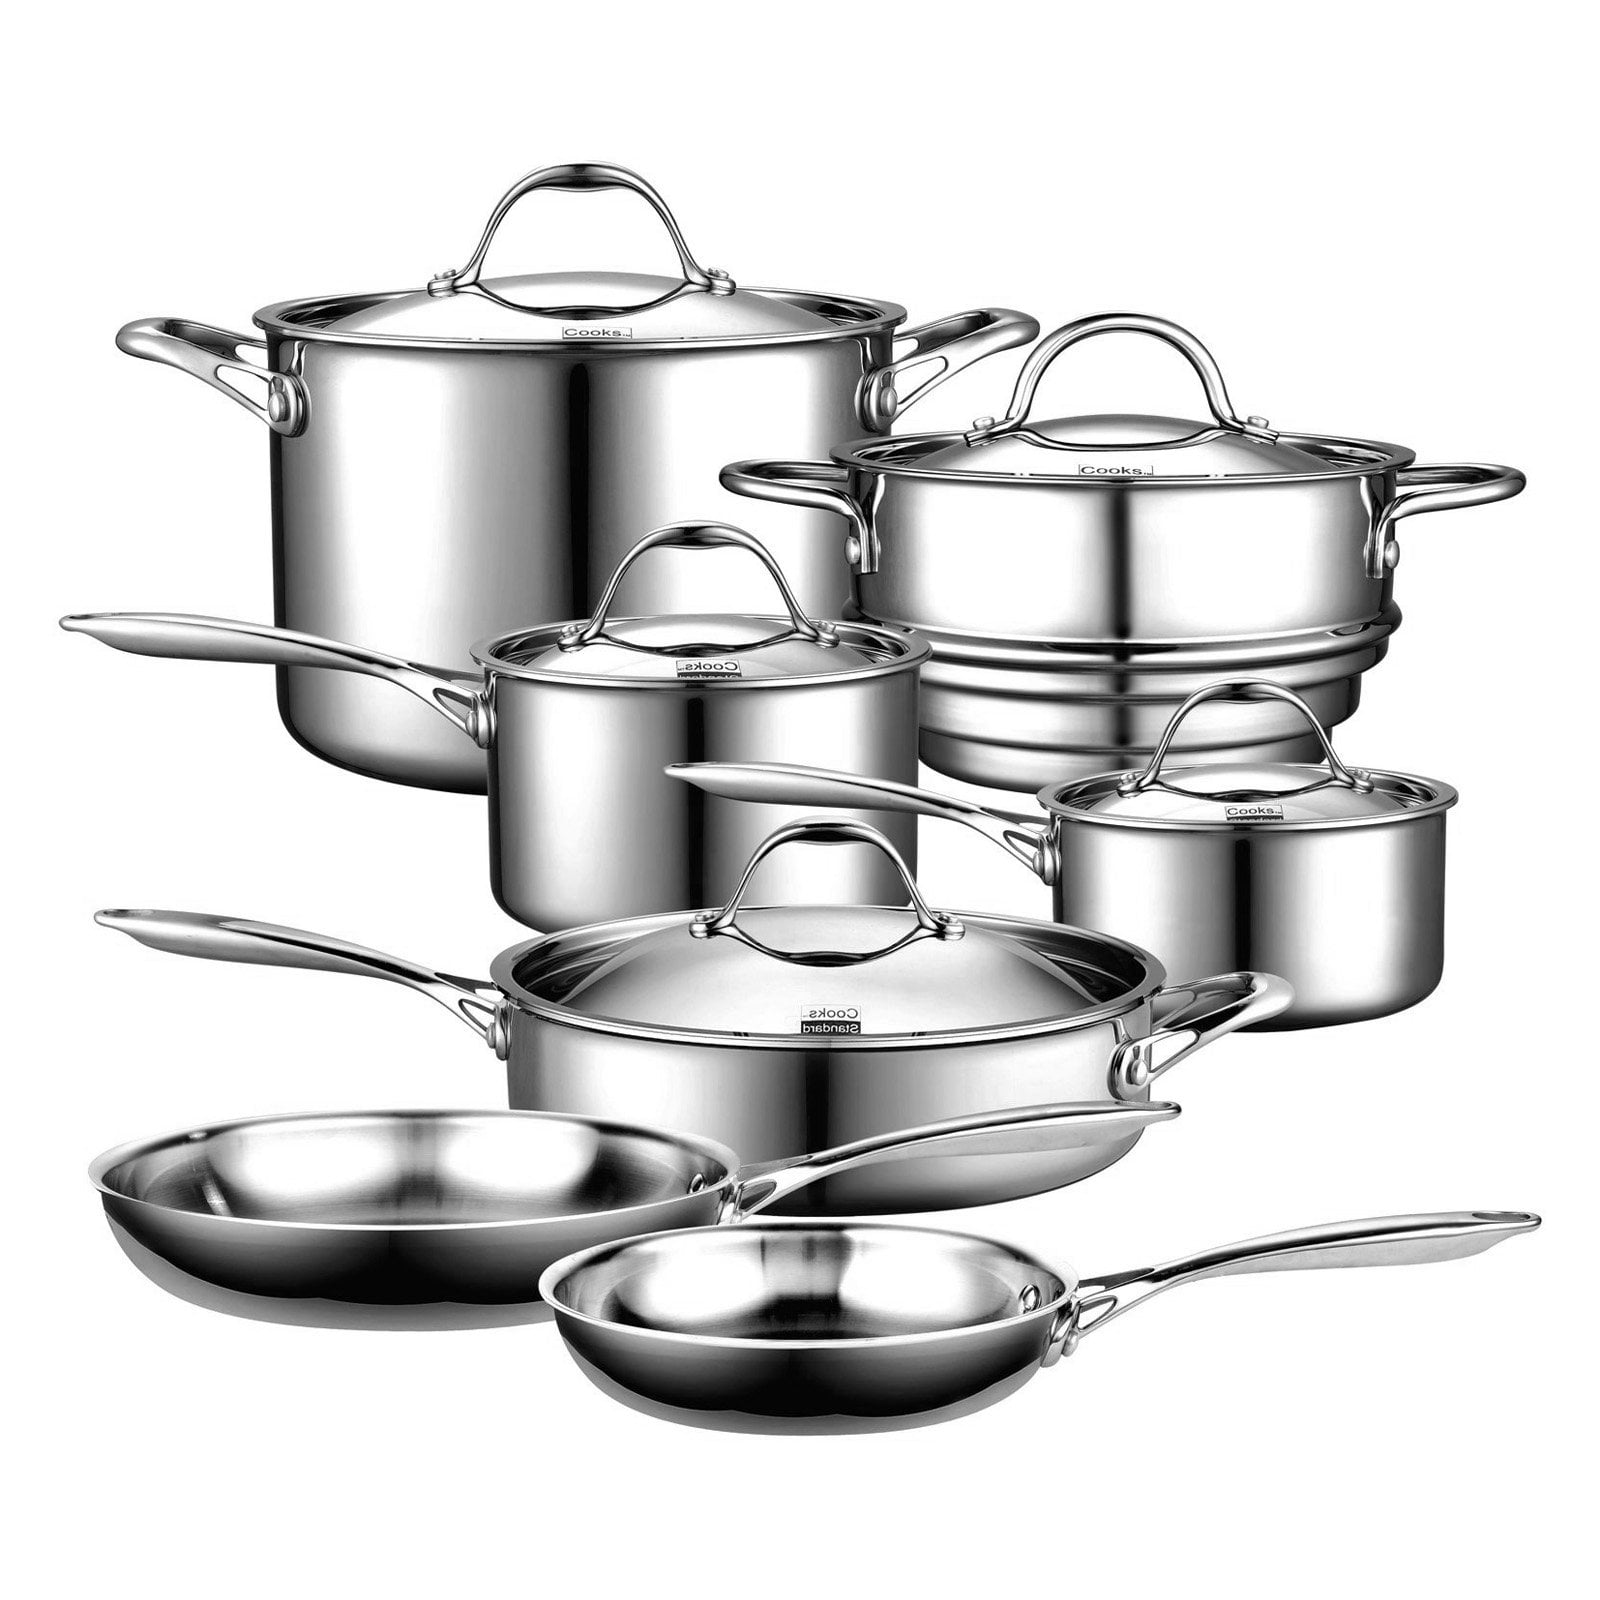 Cooks Standard Multi-ply Clad Stainless Steel 12 Piece Cookware Set - Walmart.com